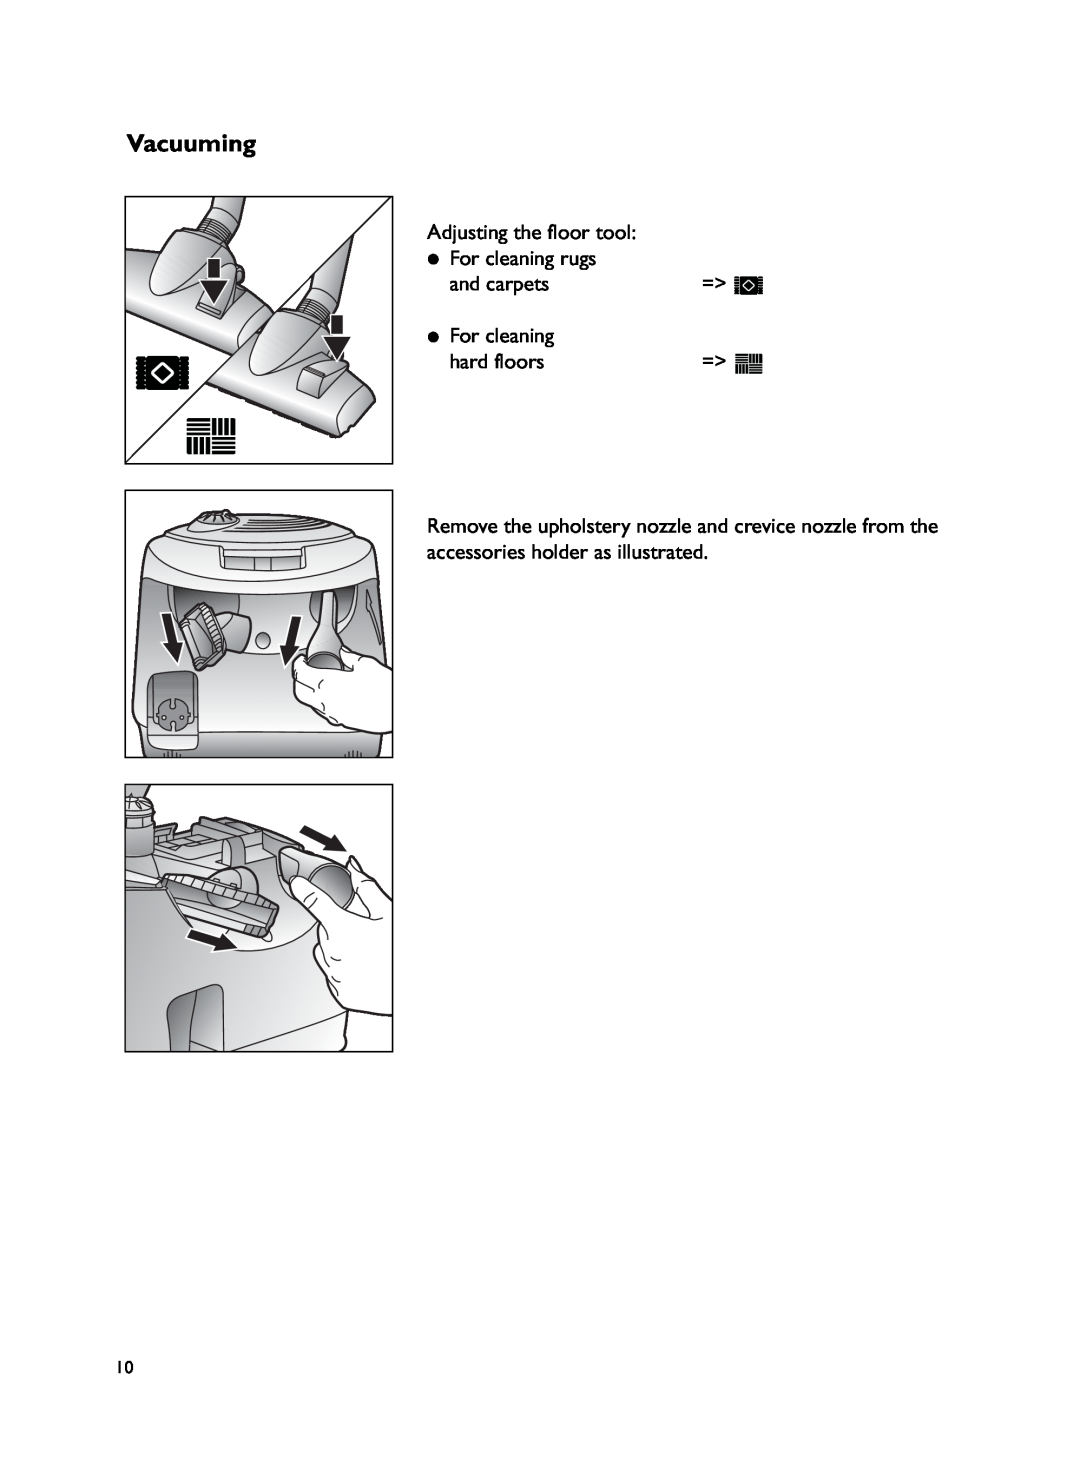 John Lewis JLVS06 instruction manual Vacuuming, Adjusting the floor tool For cleaning rugs, and carpets, hard floors 